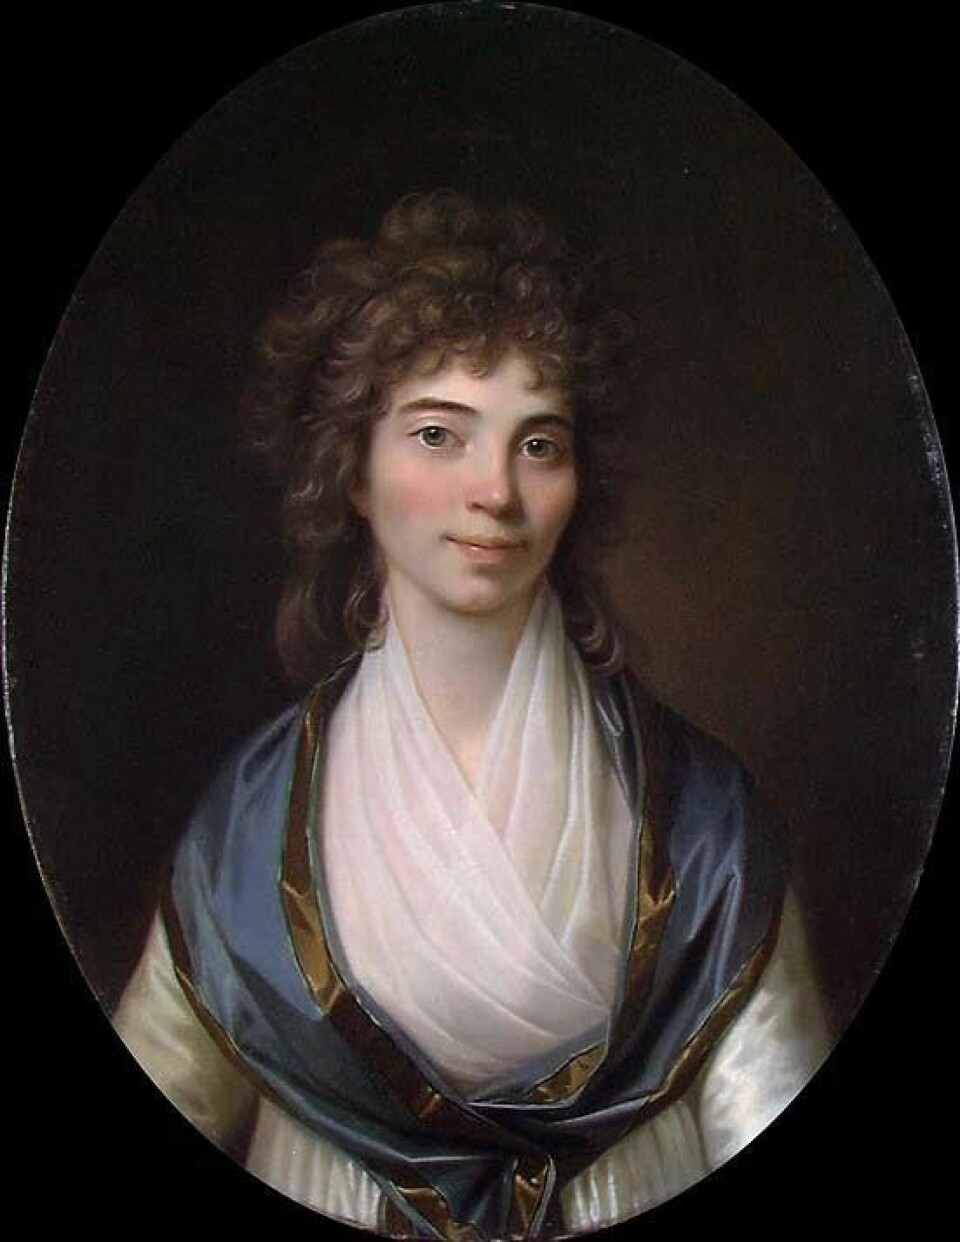 Anne Cathrine Collett was the niece of John Collett. She lived in Denmark and eventually married the official, Peter Nicolaj Arbo. He joined the family company Collett & Son. (Photo: National Museum of Art, Architecture and Design)